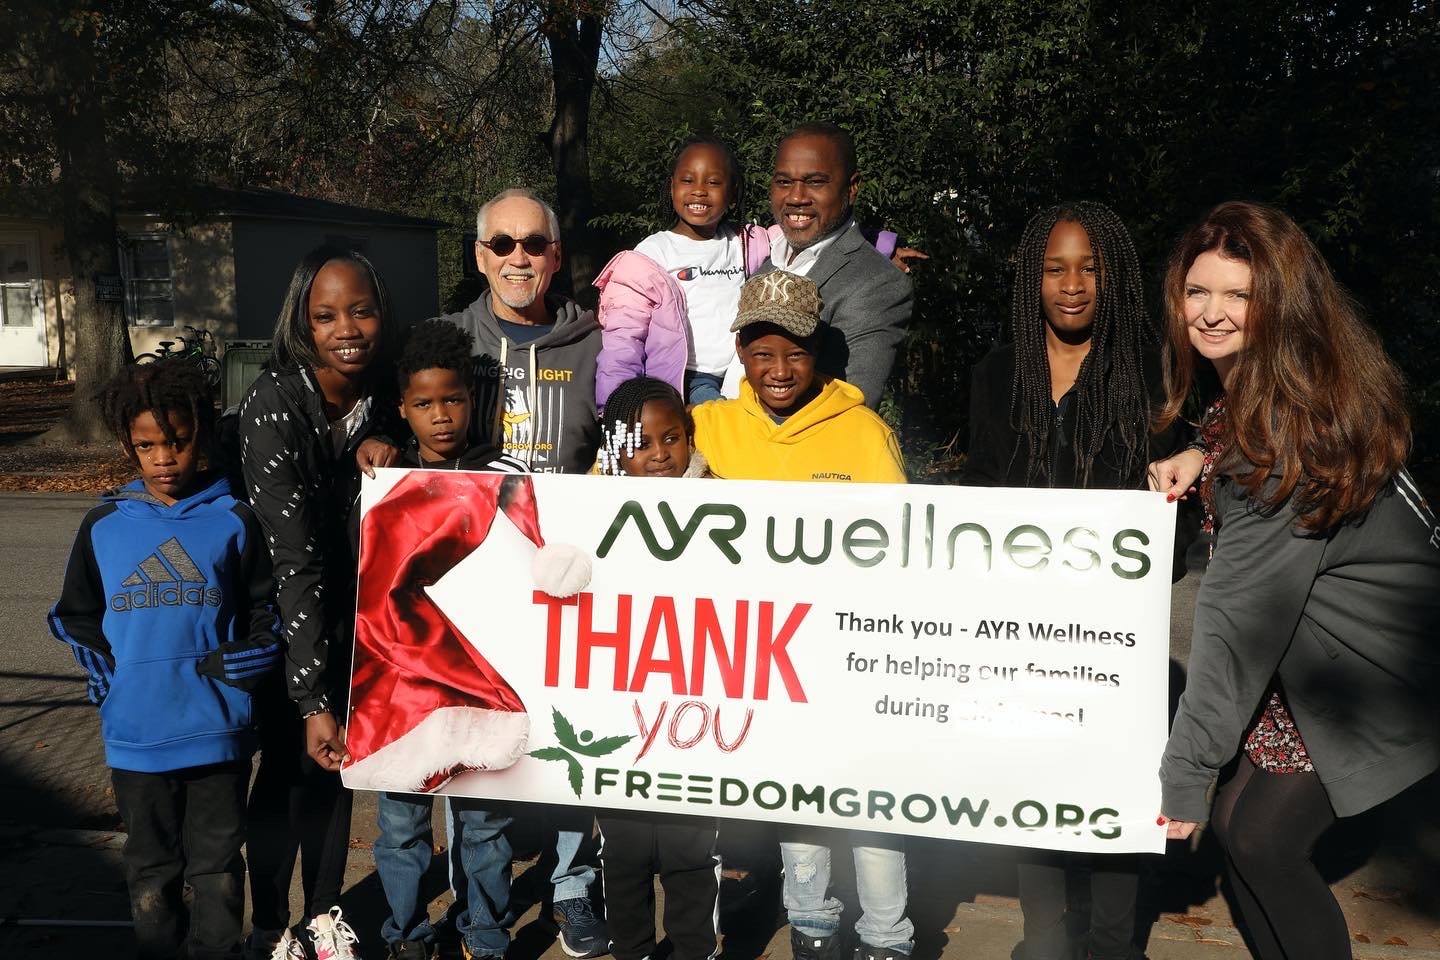 You are currently viewing Giving Back to the Community: Freedom Grow in North Carolina